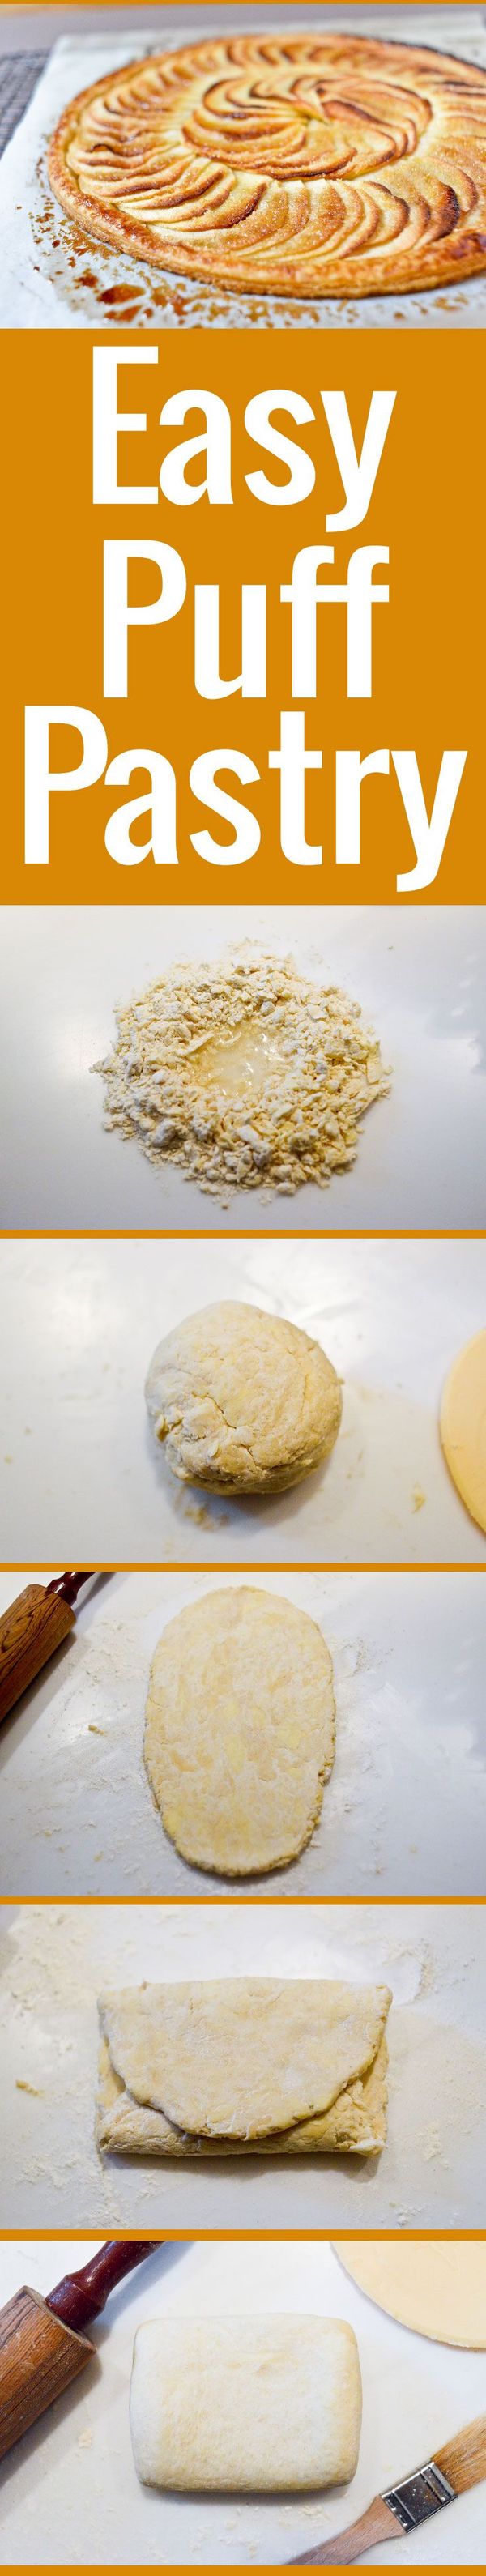 Rough Puff (Quick and Easy Puff Pastry